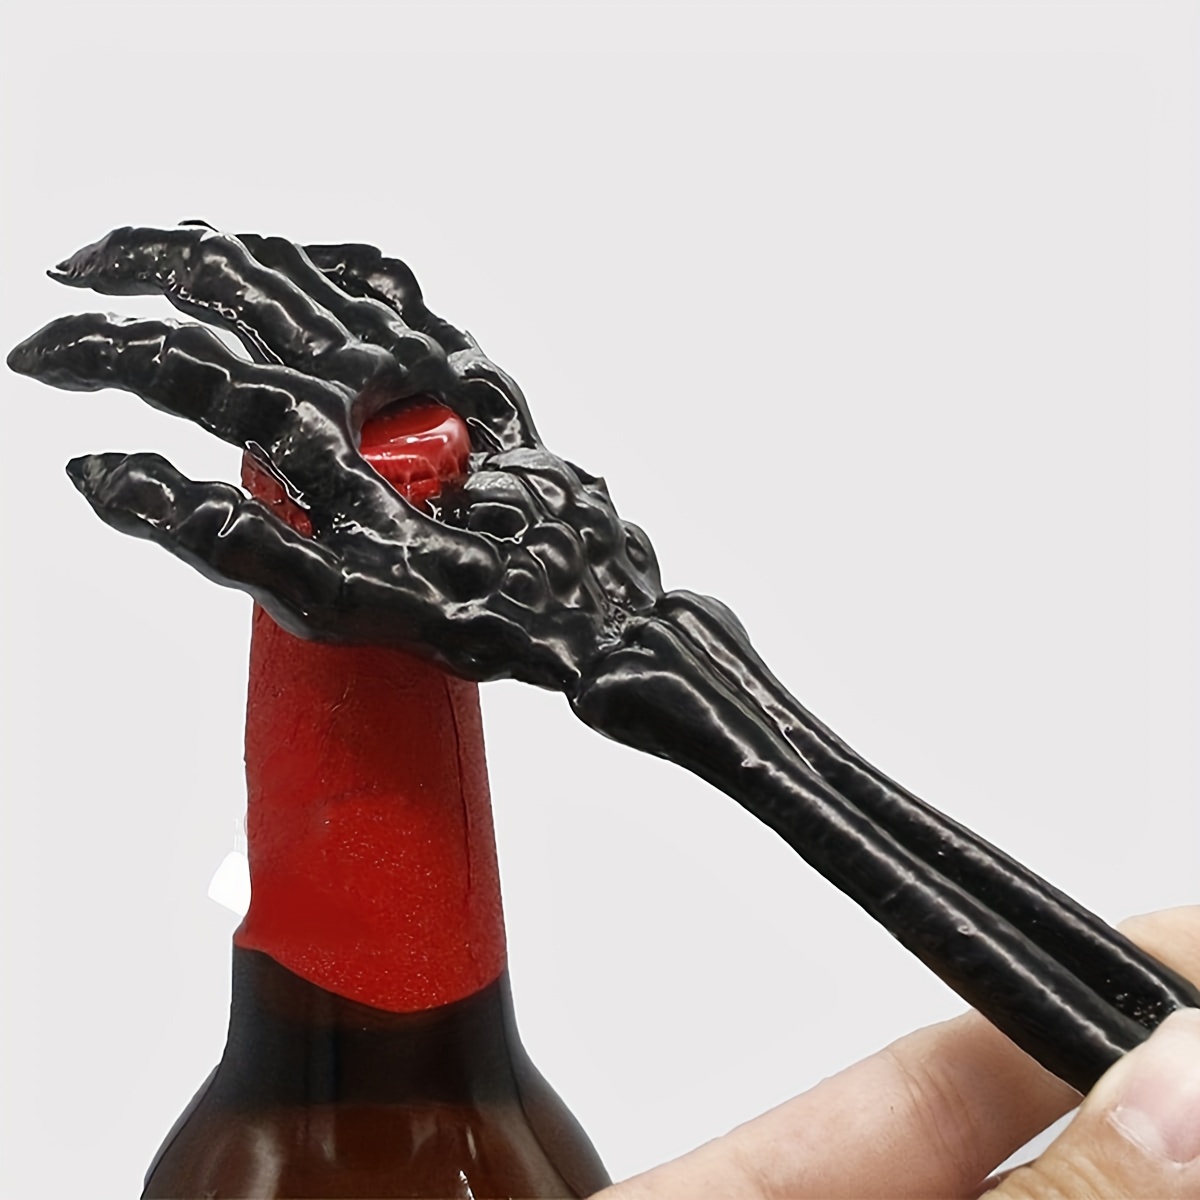  LKKCHER Skull Gifts, Skeleton Hand Beer Bottle Opener, Gothic  Gifts Birthday Halloween Gifts for Men Dad Boyfriend Husband Beer Opener  Collector with Gift Box and Card: Home & Kitchen